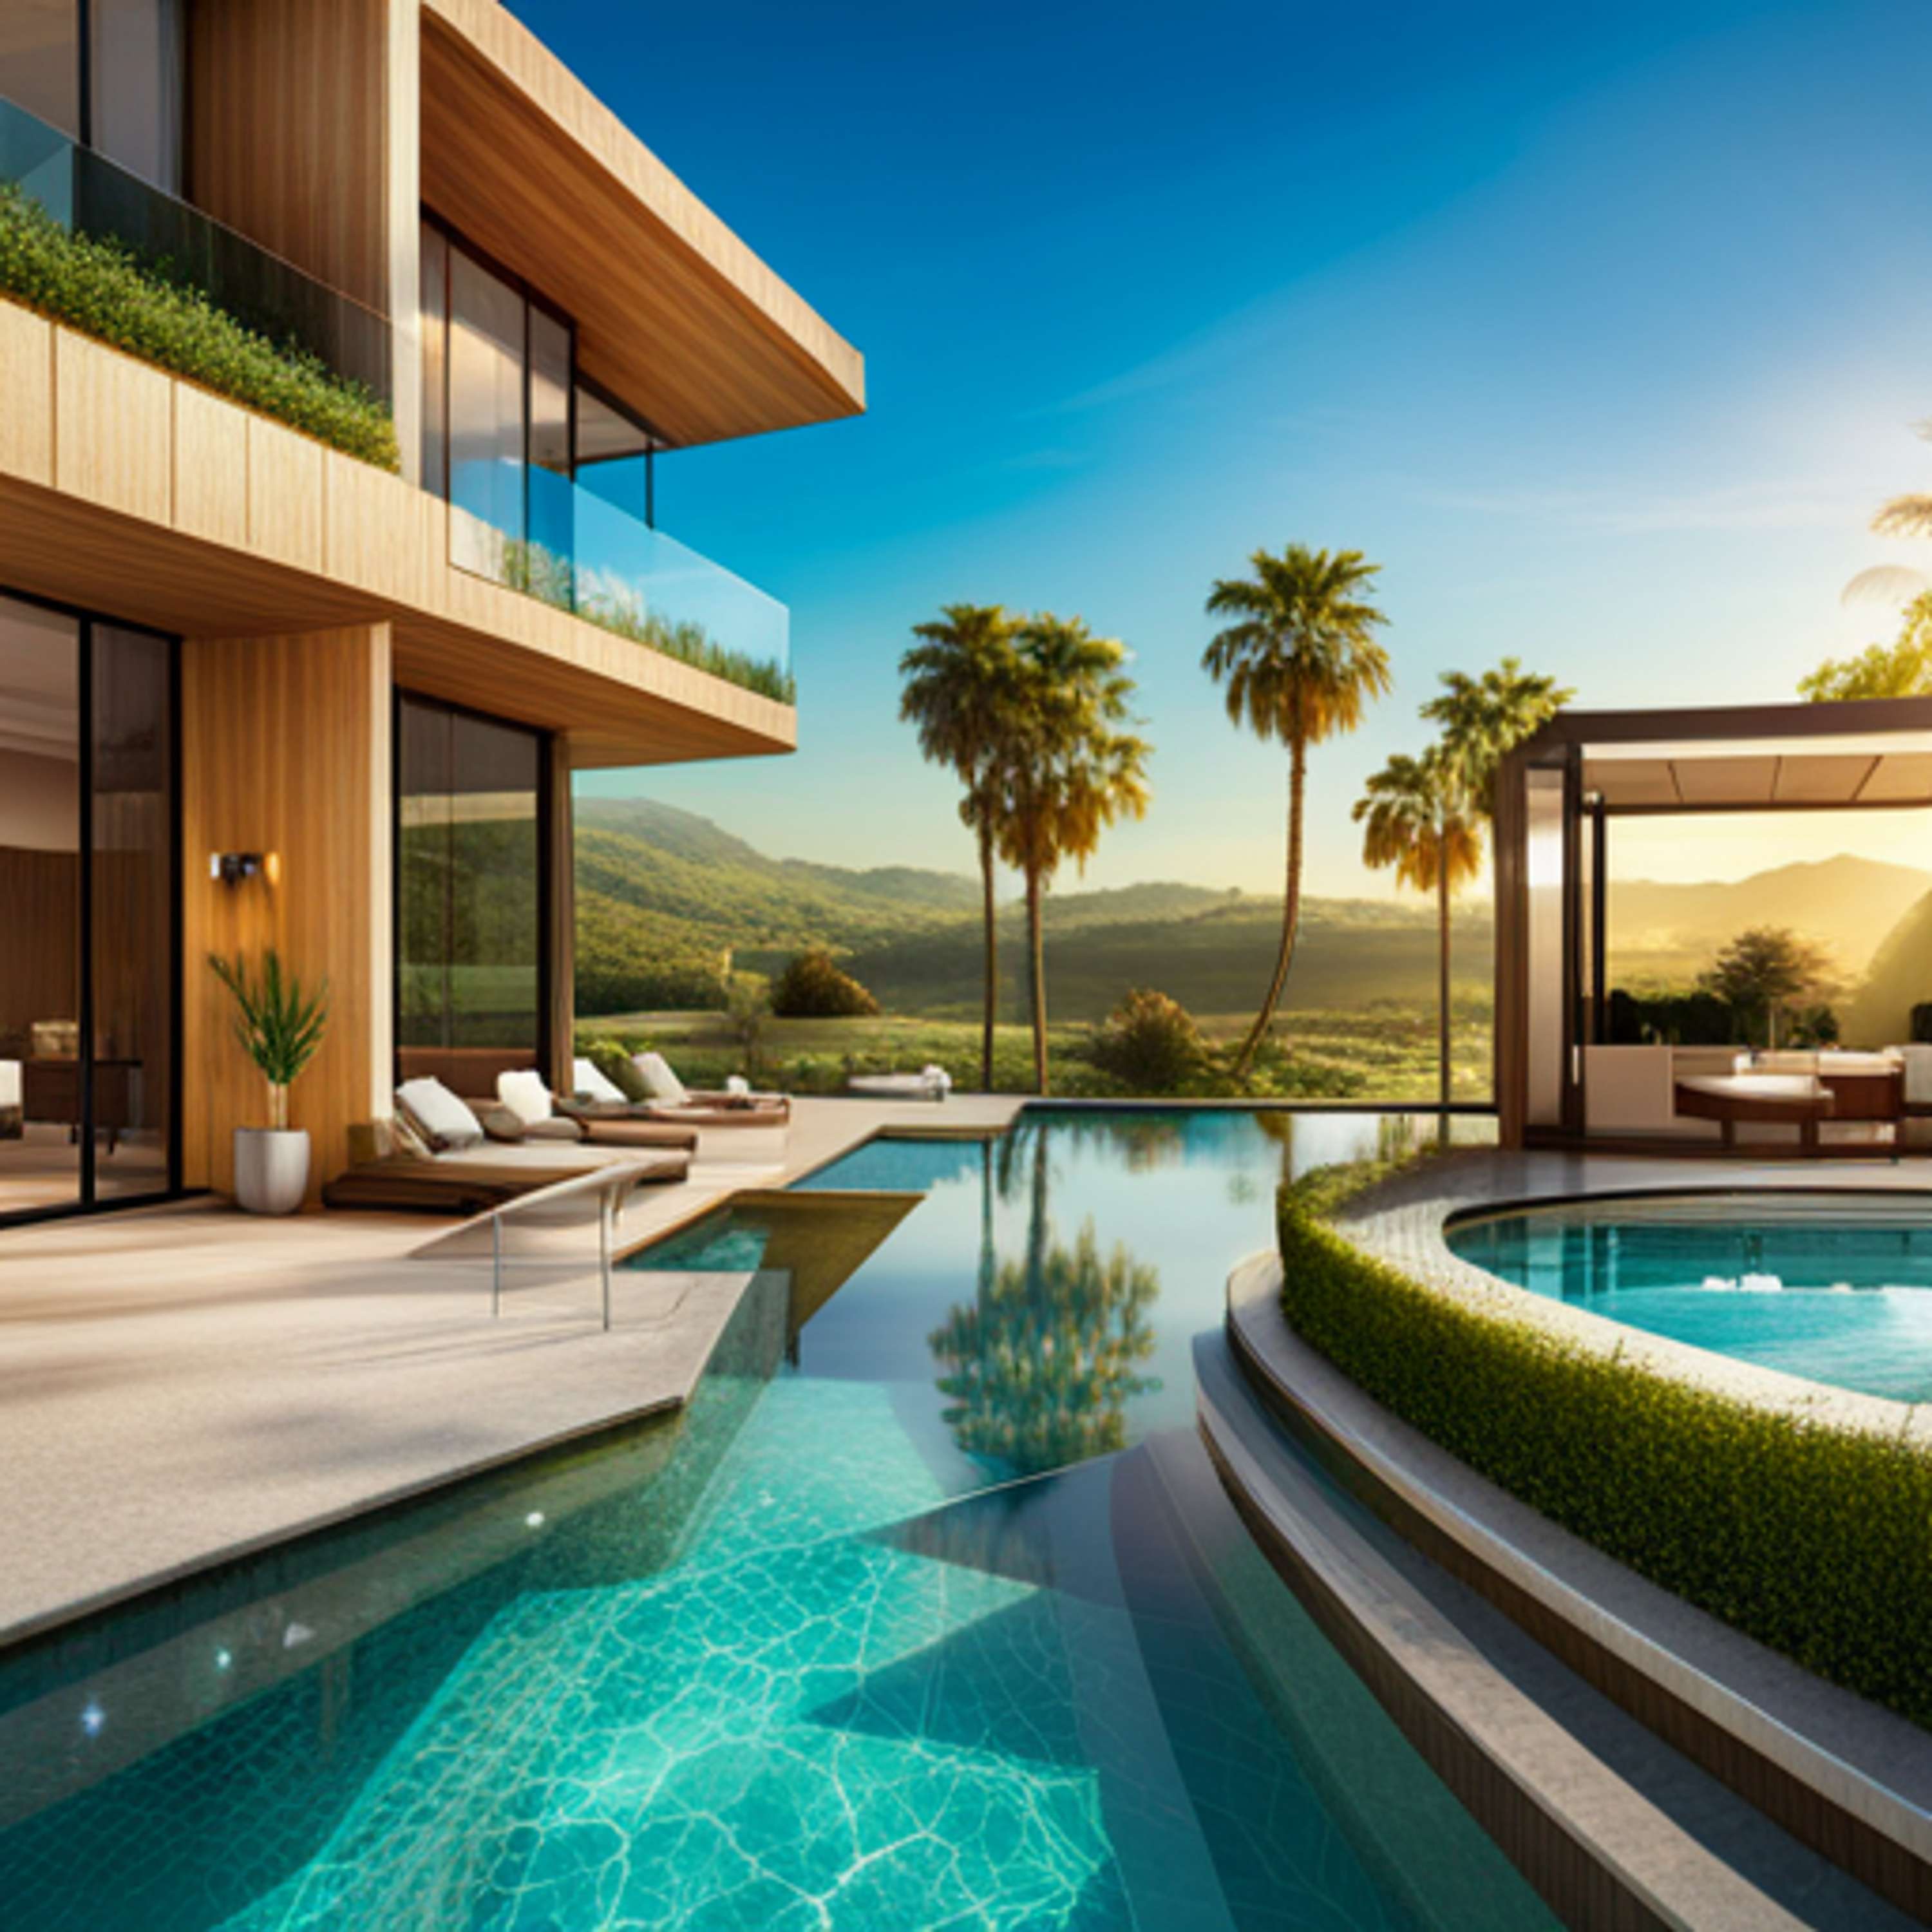 Calabasas Luxury Homes: The Real Cost